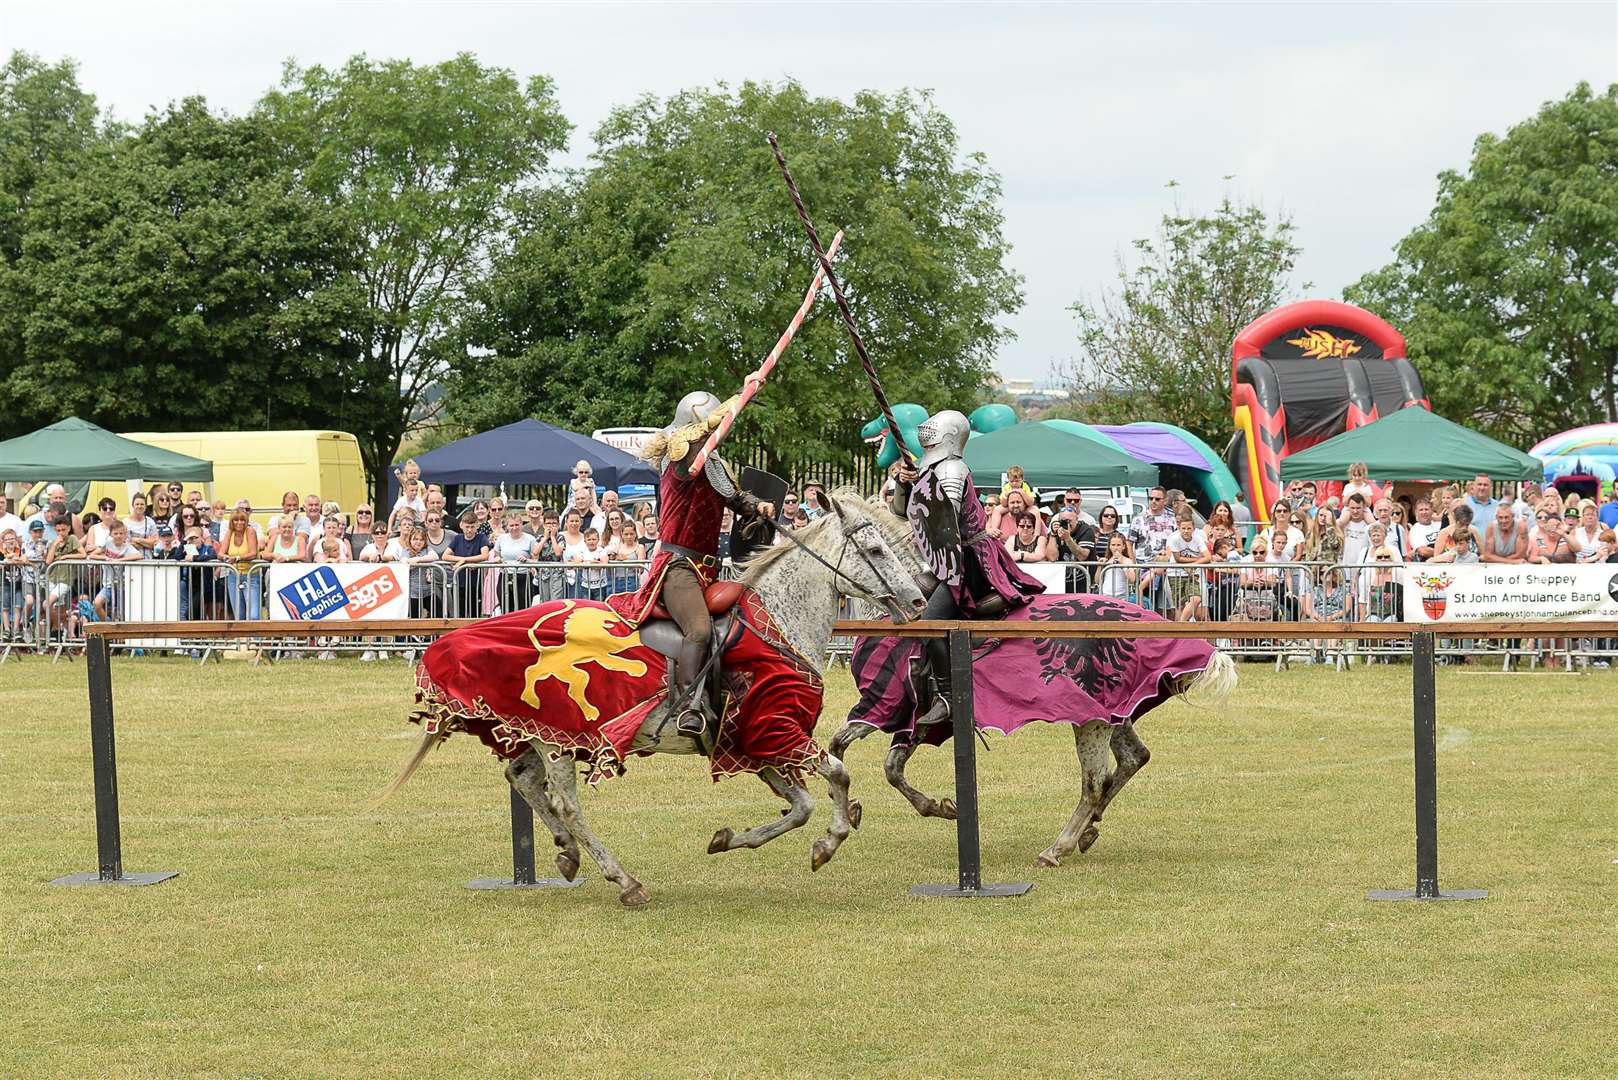 Clash: The Cavalry of Heroes Jousting Display Team at the Sheppey Summer Spectacular hosted by the Sheerness Freemasons. Picture: Tony Jones (13768293)